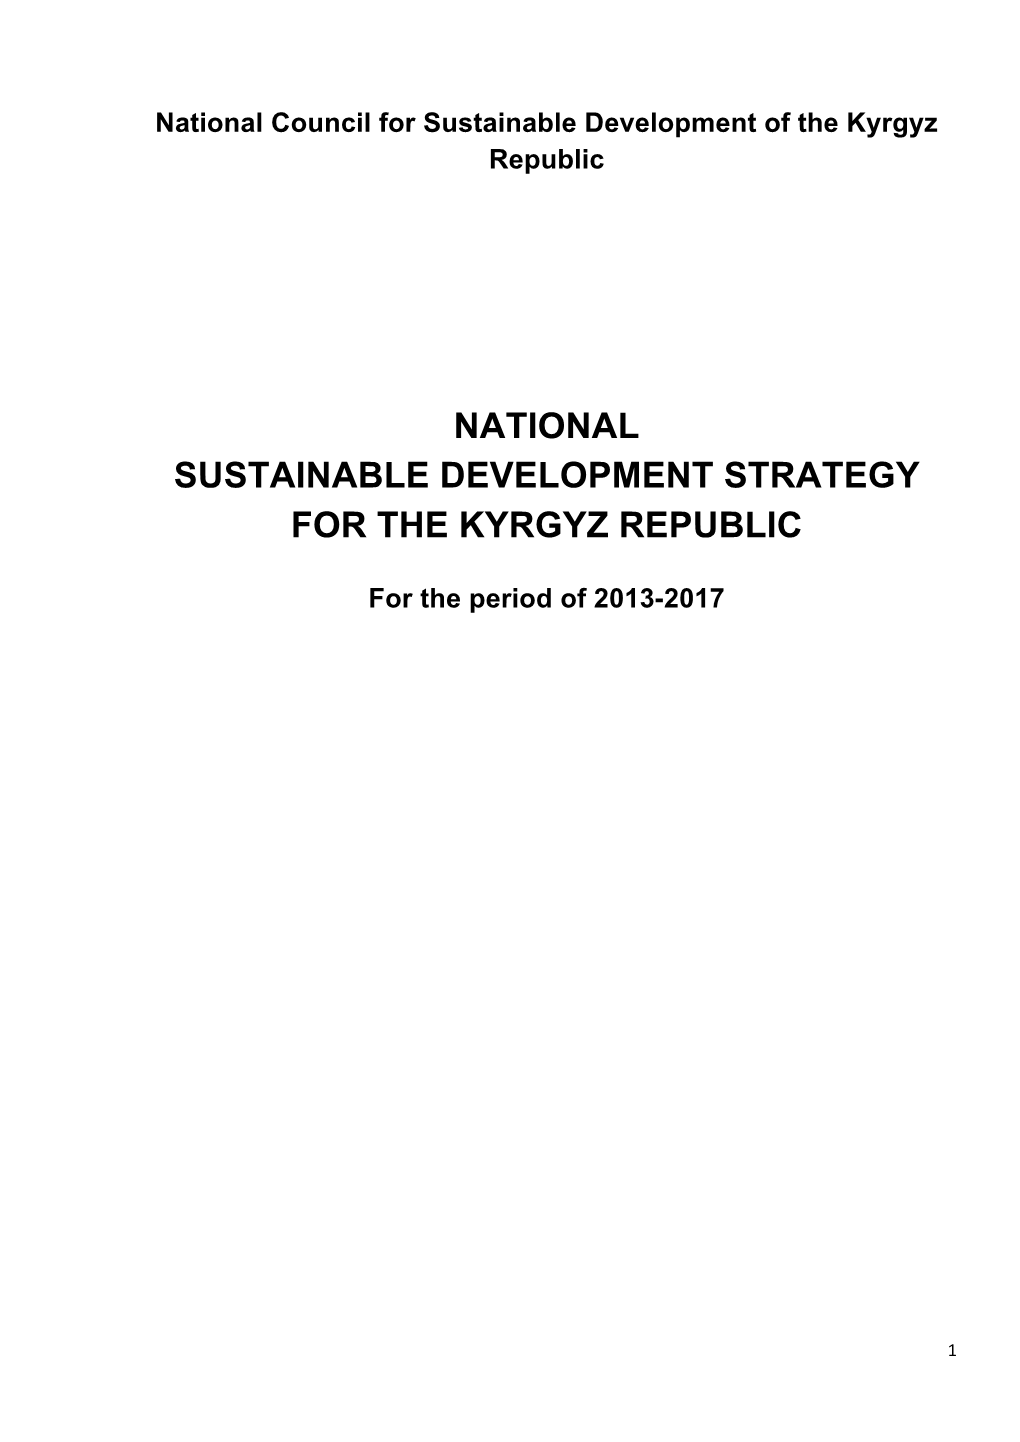 National Council for Sustainable Development of the Kyrgyz Republic